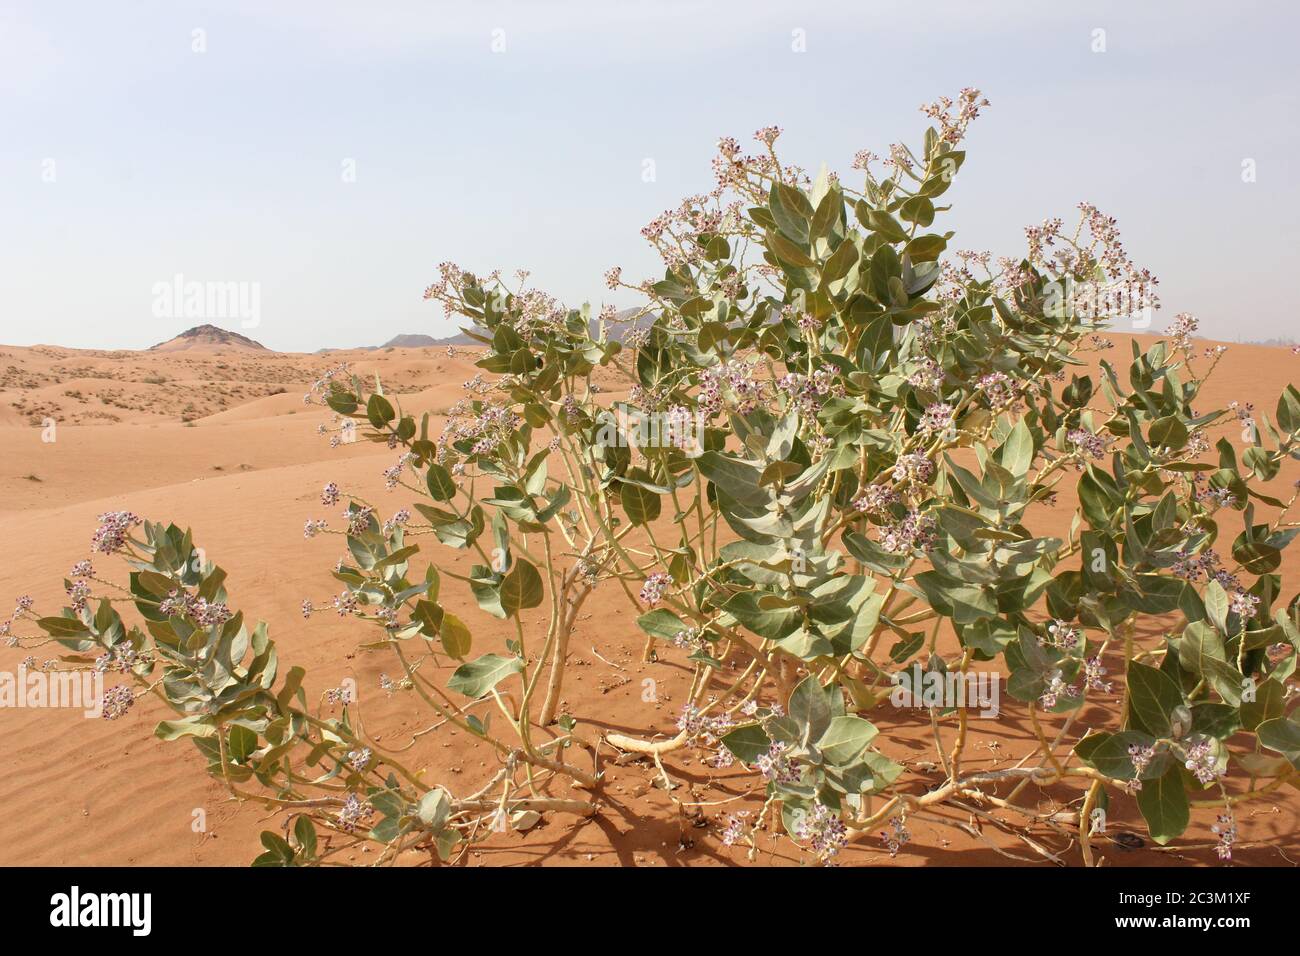 Apple of Sodom (Calotropis procera) plant thriving in arid Arabian desert sand dunes. This is a drought resistant and evergreen desert wild plant. Stock Photo